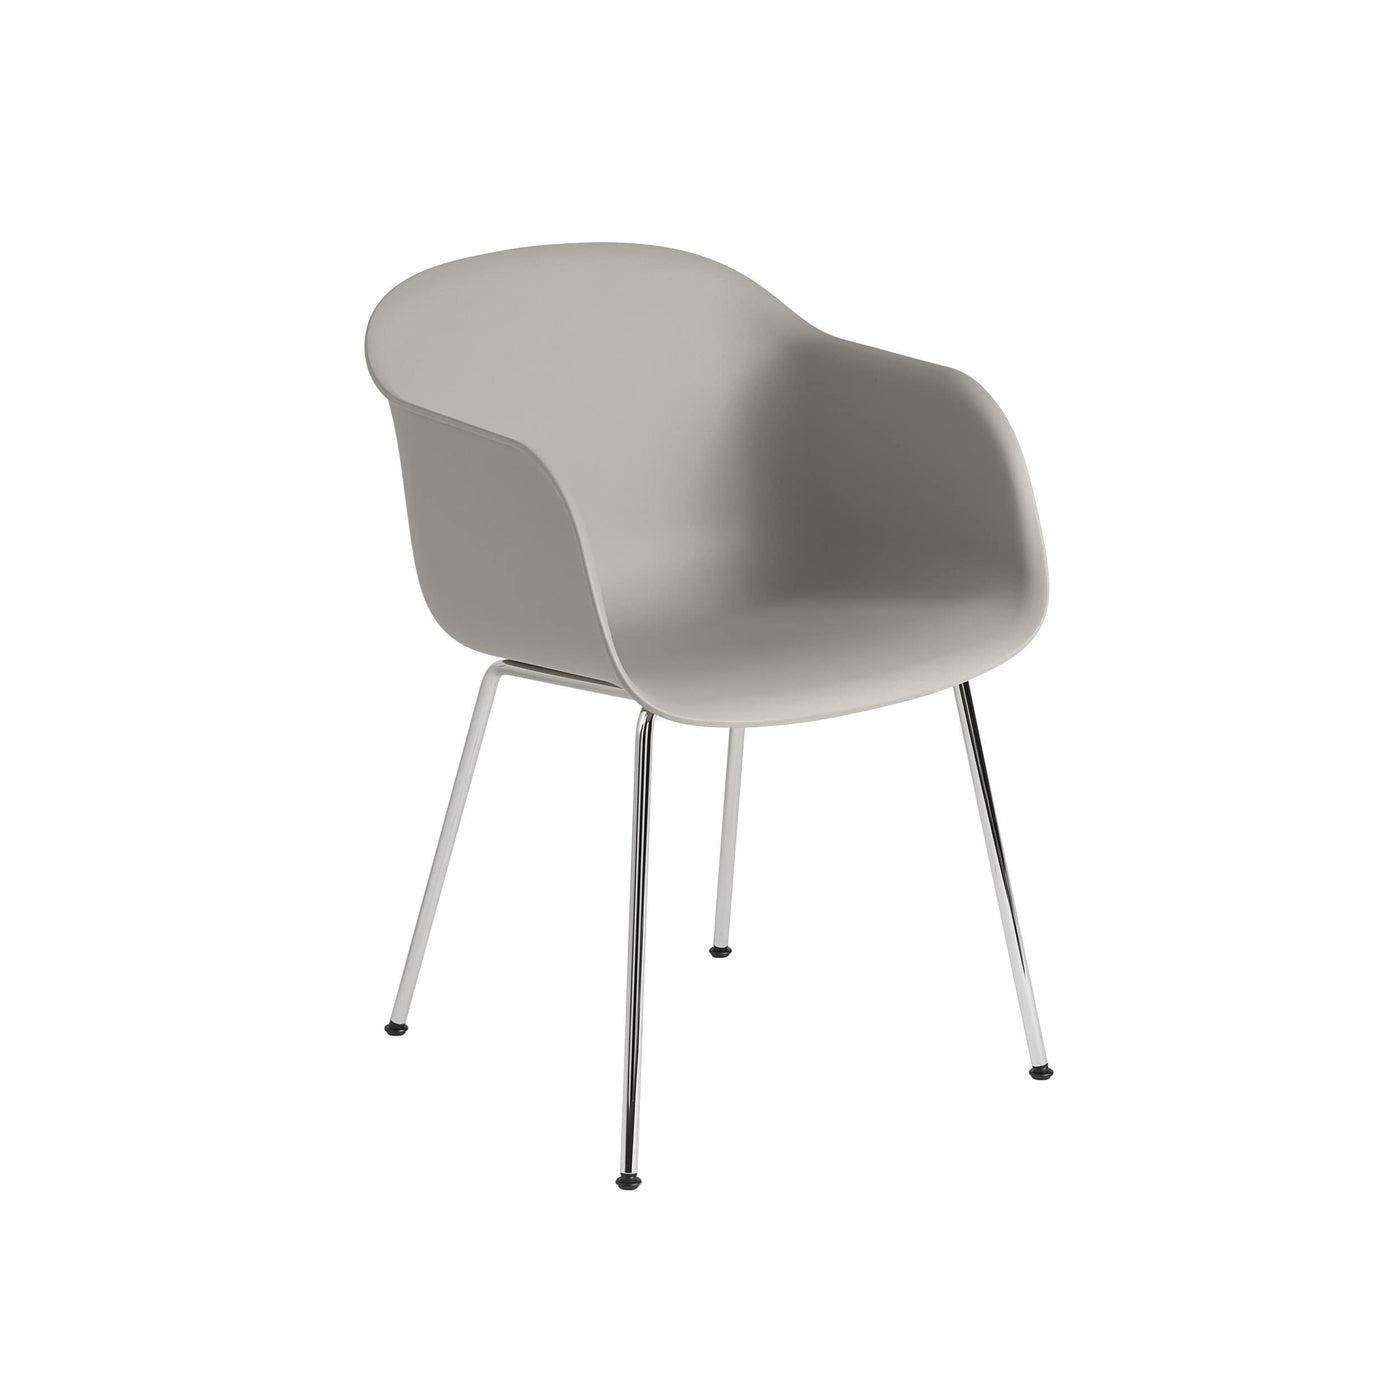 Muuto Fiber Armchair tube base in grey with chrome legs. Made to order from someday designs.  #colour_grey